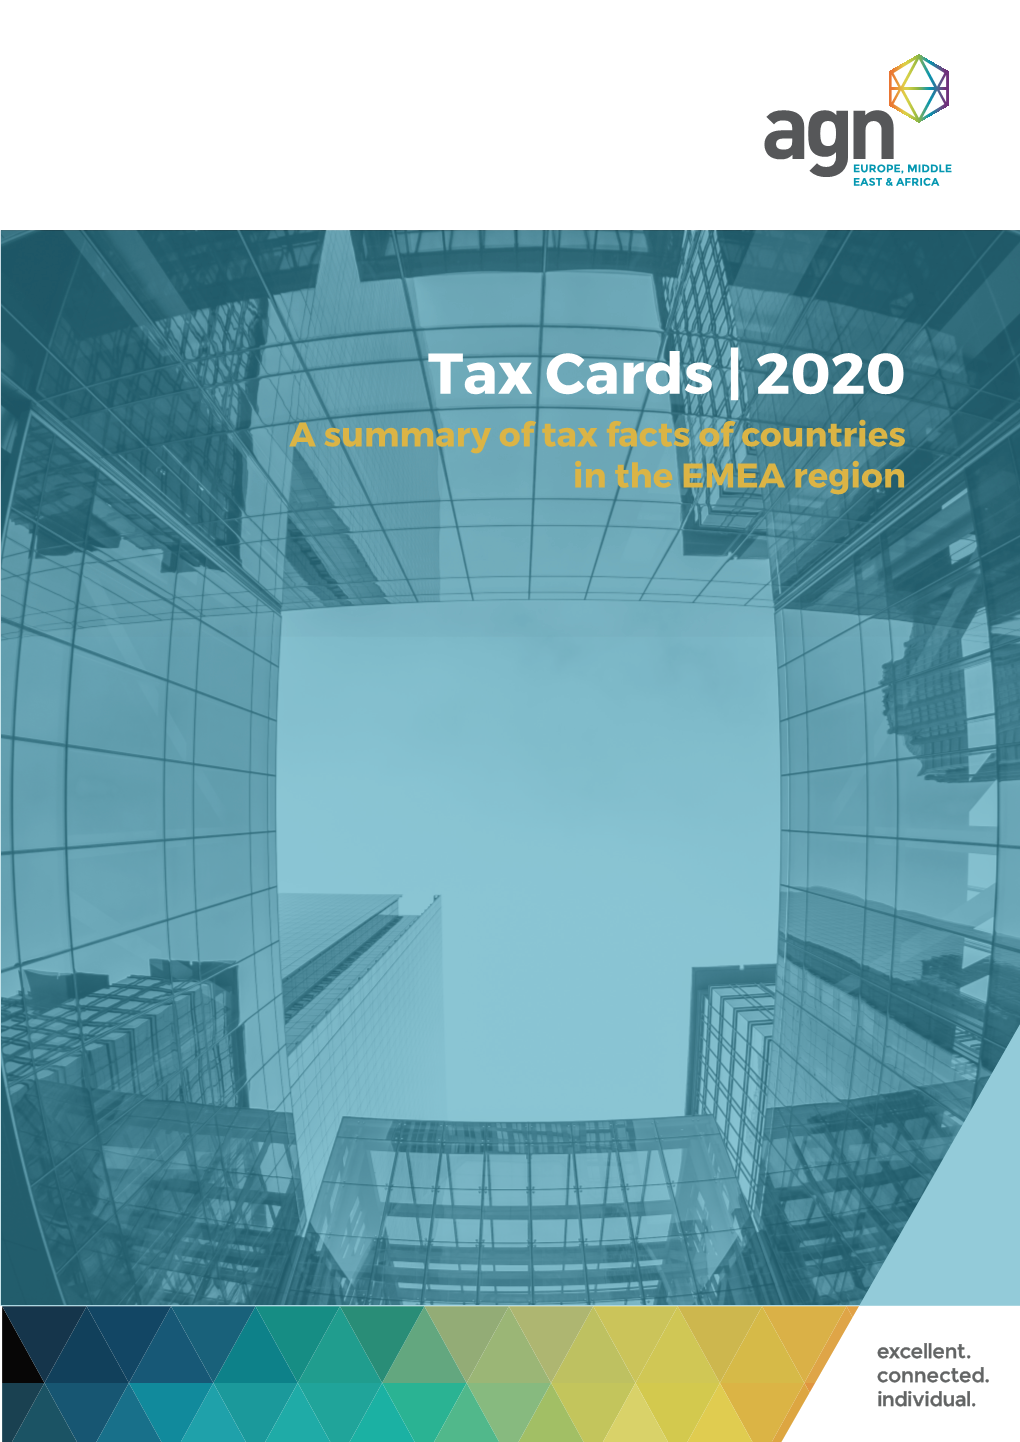 Tax Cards | 2020 a Summary of Tax Facts of Countries in the EMEA Region 2 | Tax Card 2020 - AGN EMEA EUROPE, MIDDLE EAST & AFRICA